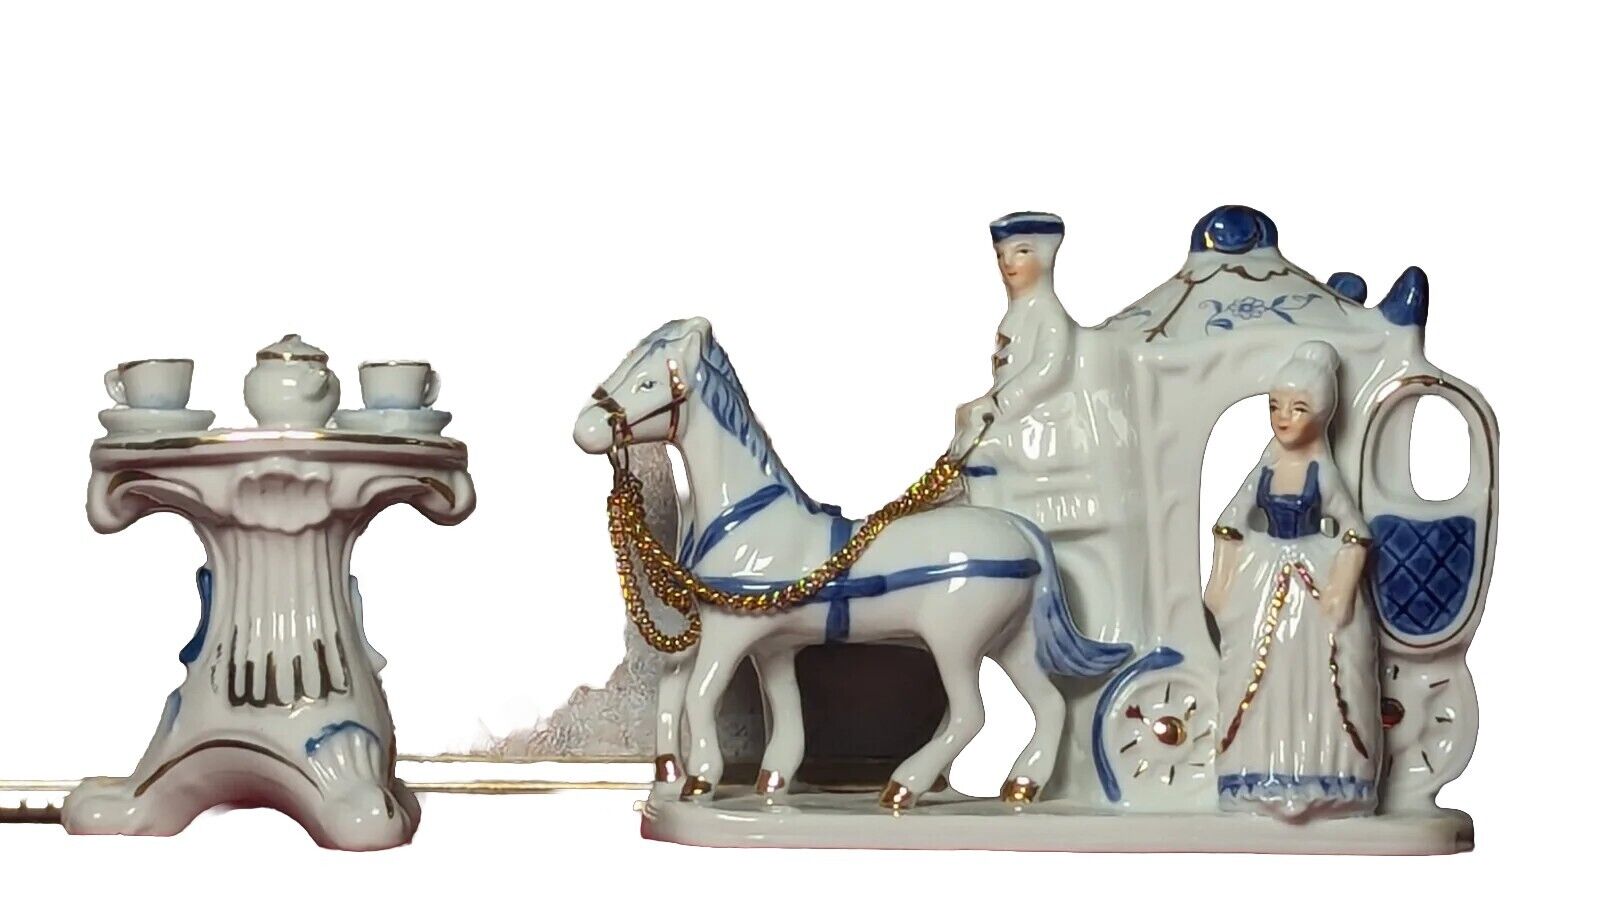 Retro Figurines Victorian Carriage Antique Blue White Table Limited Buy Now